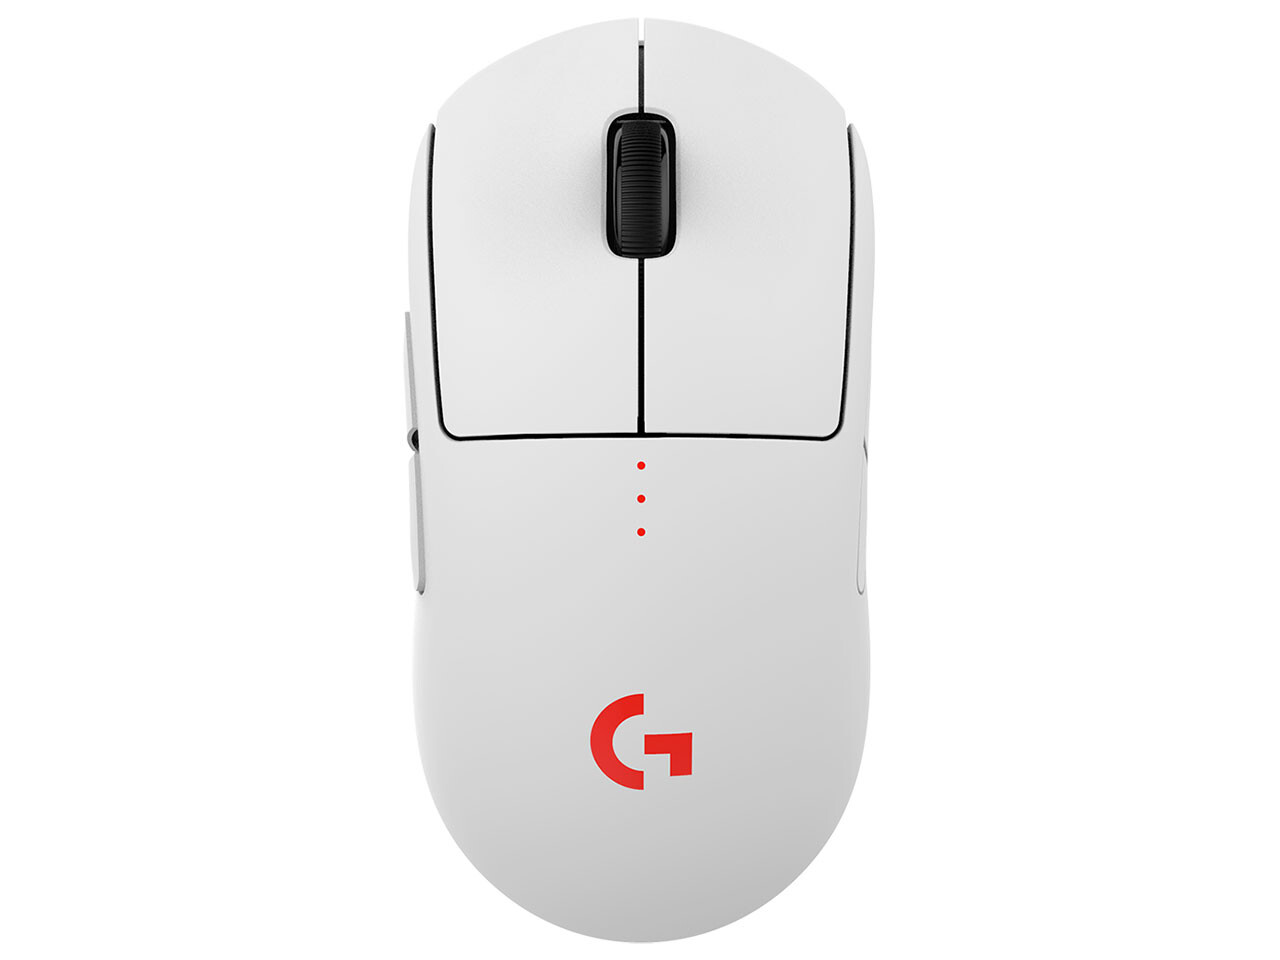 Logitech launches the limited edition “GHOST” gaming mouse | KitGuru